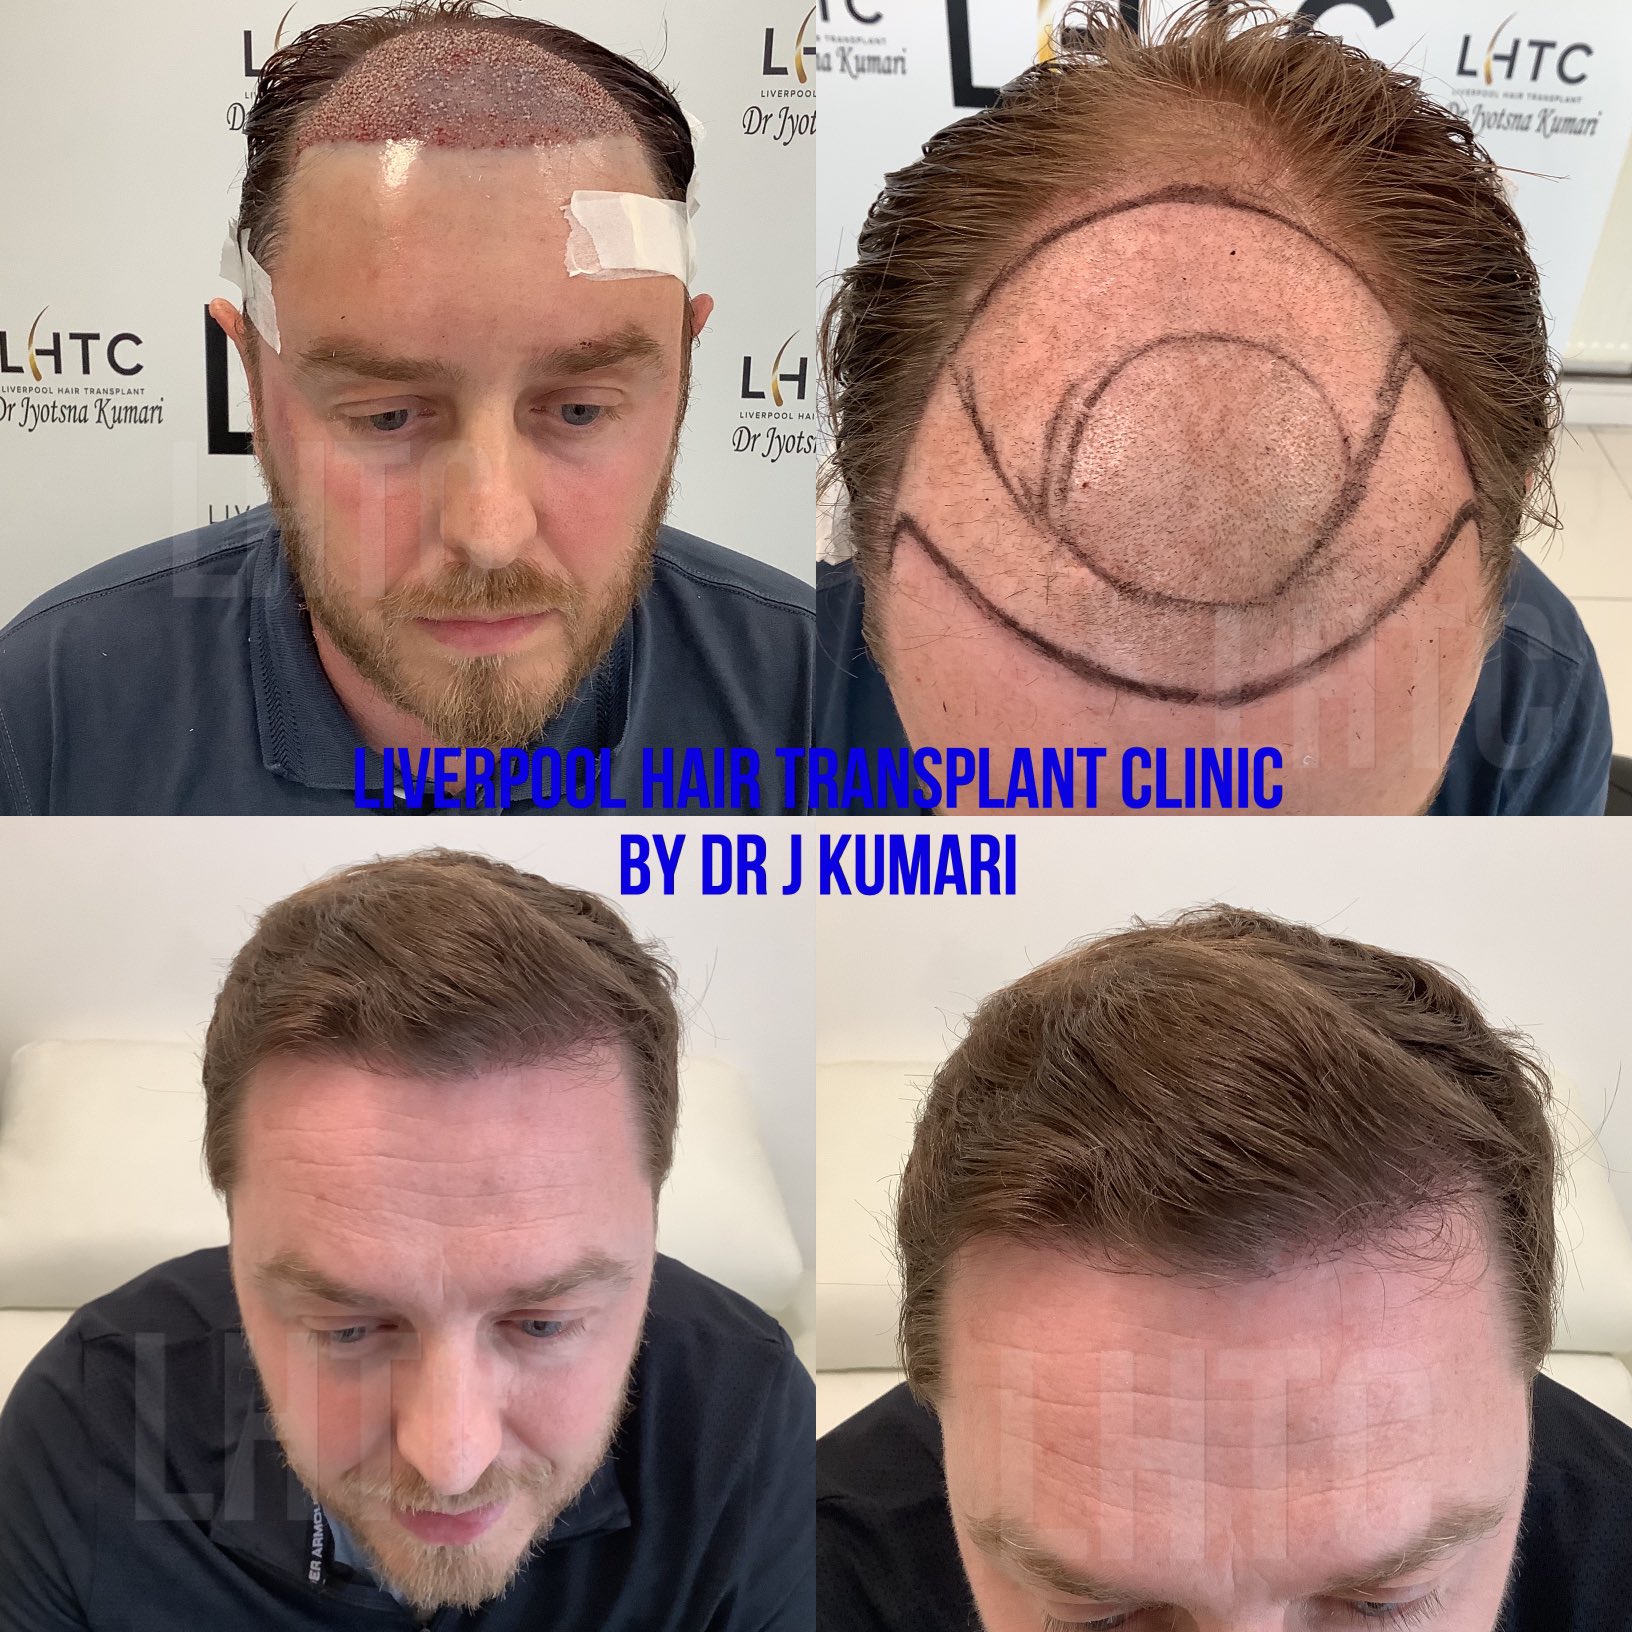 Liverpool Hair Transplant Clinic on Twitter: 